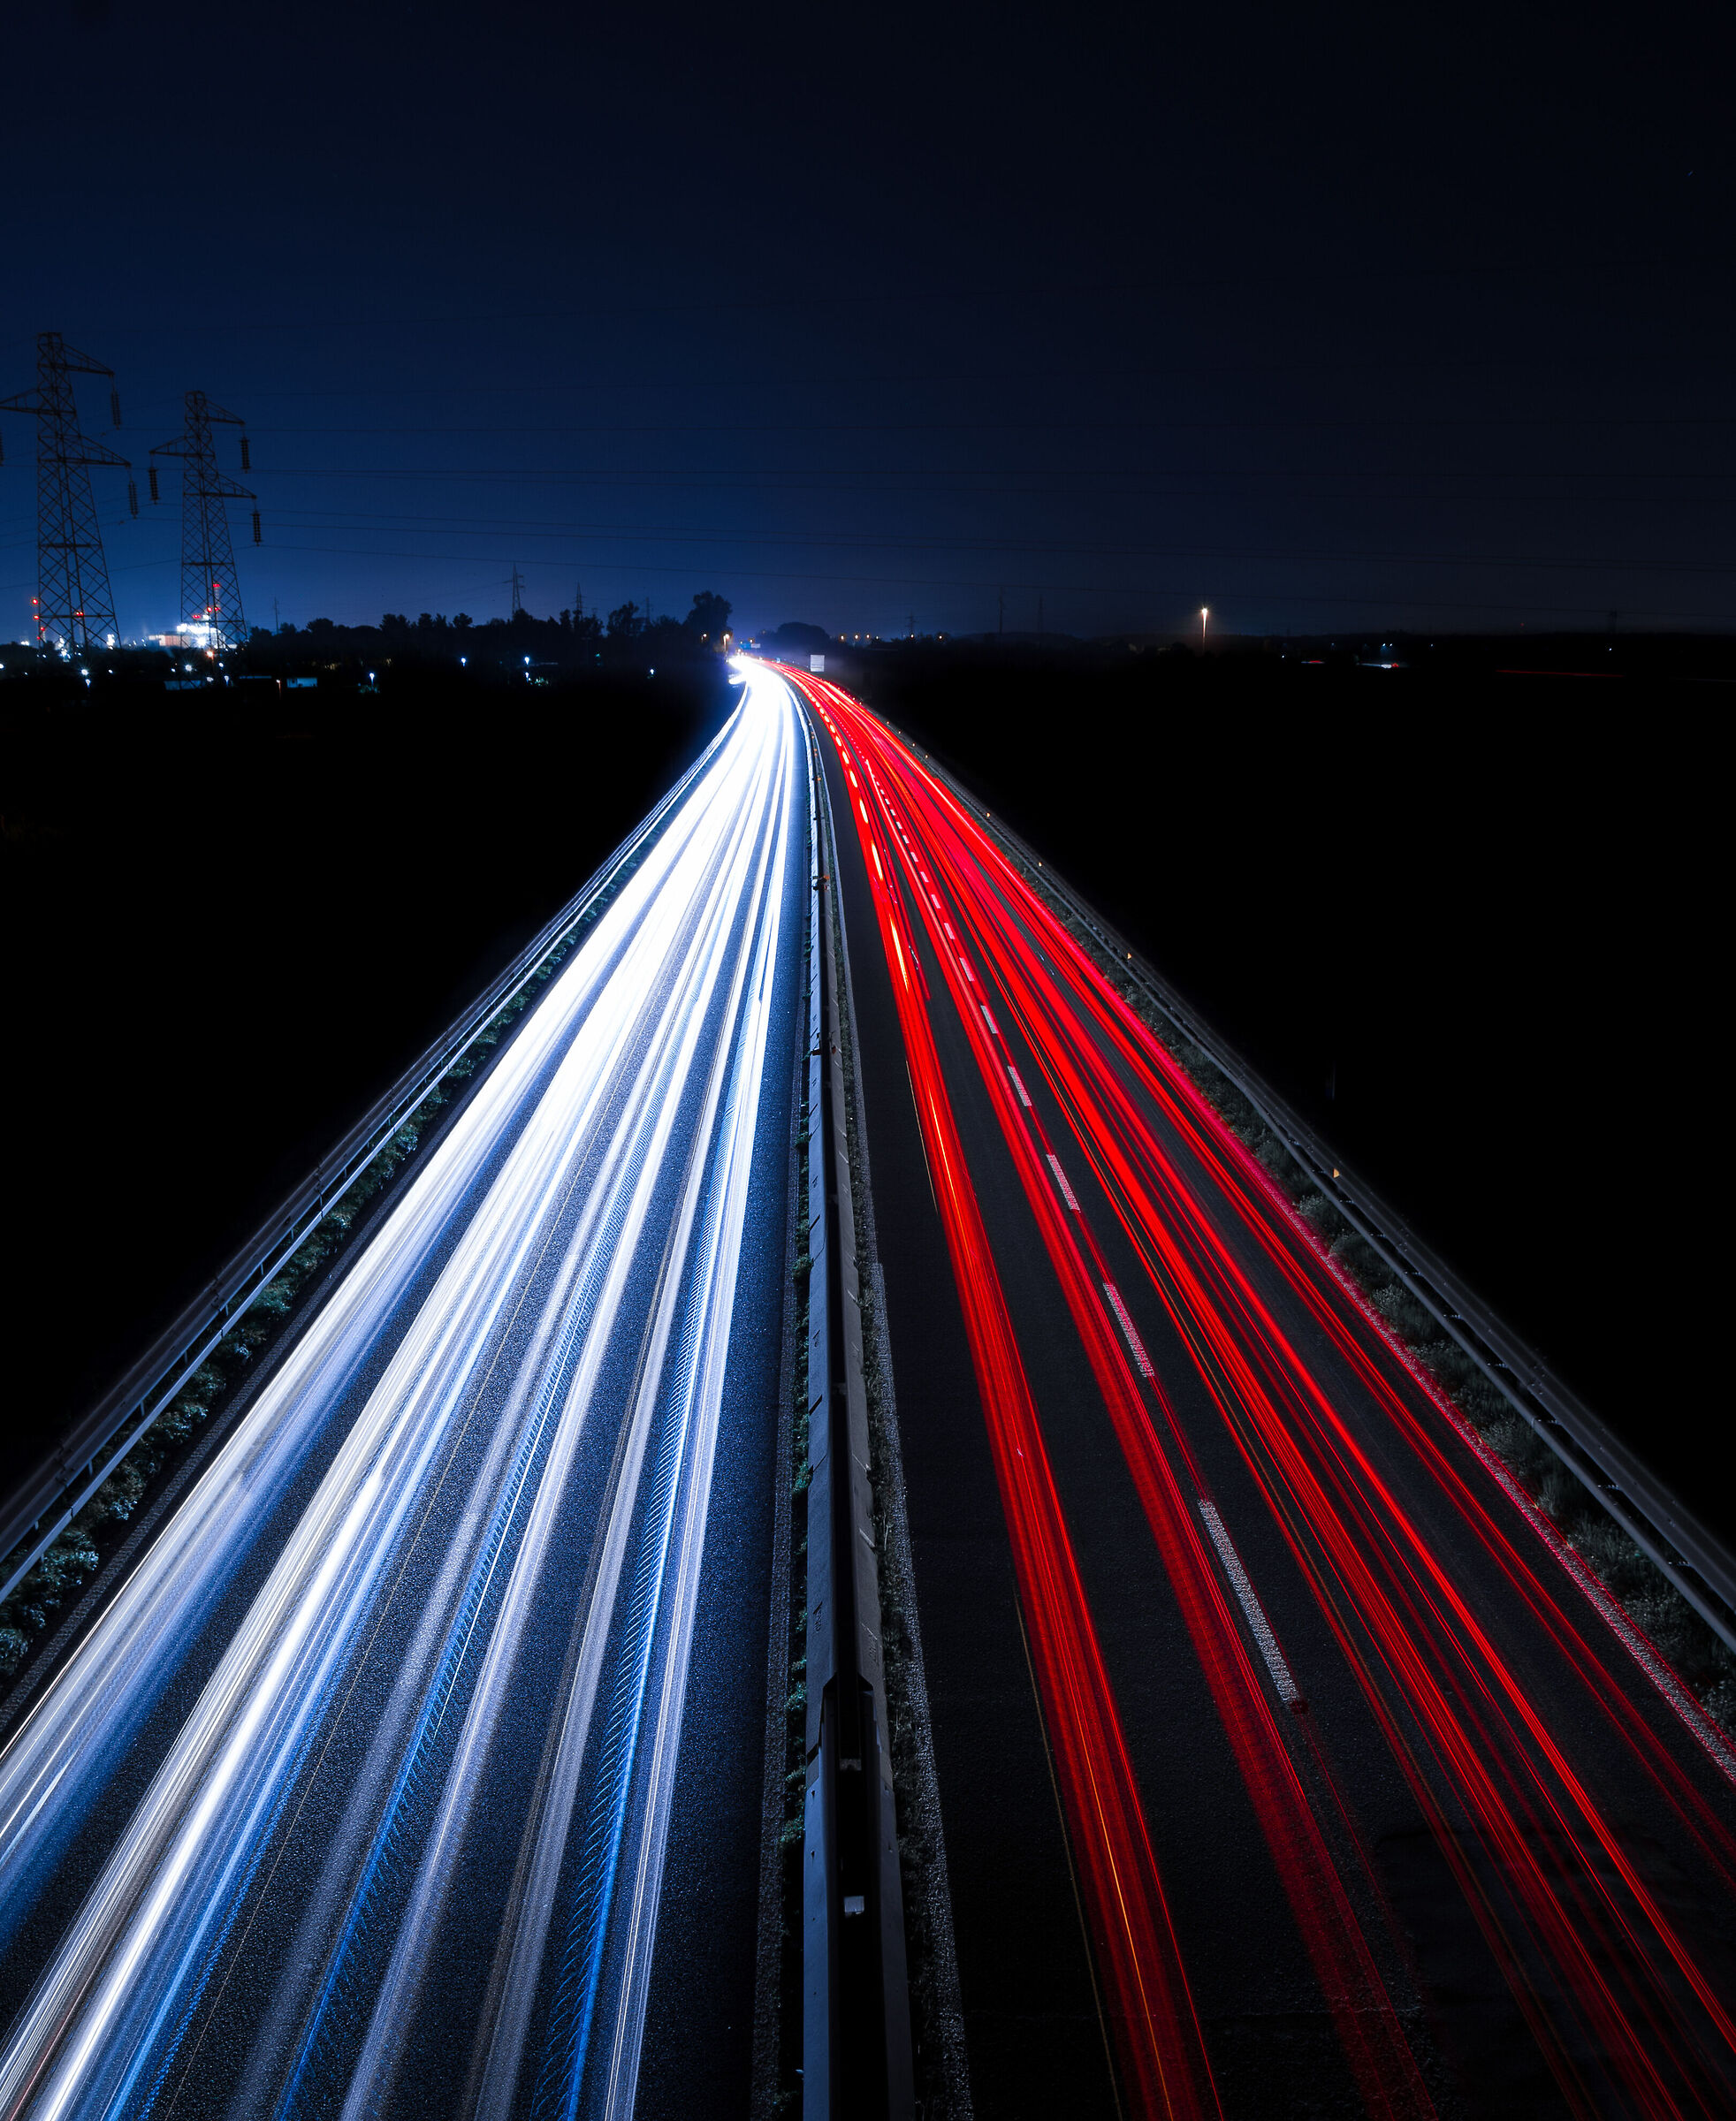 Light trails on the expressway ...